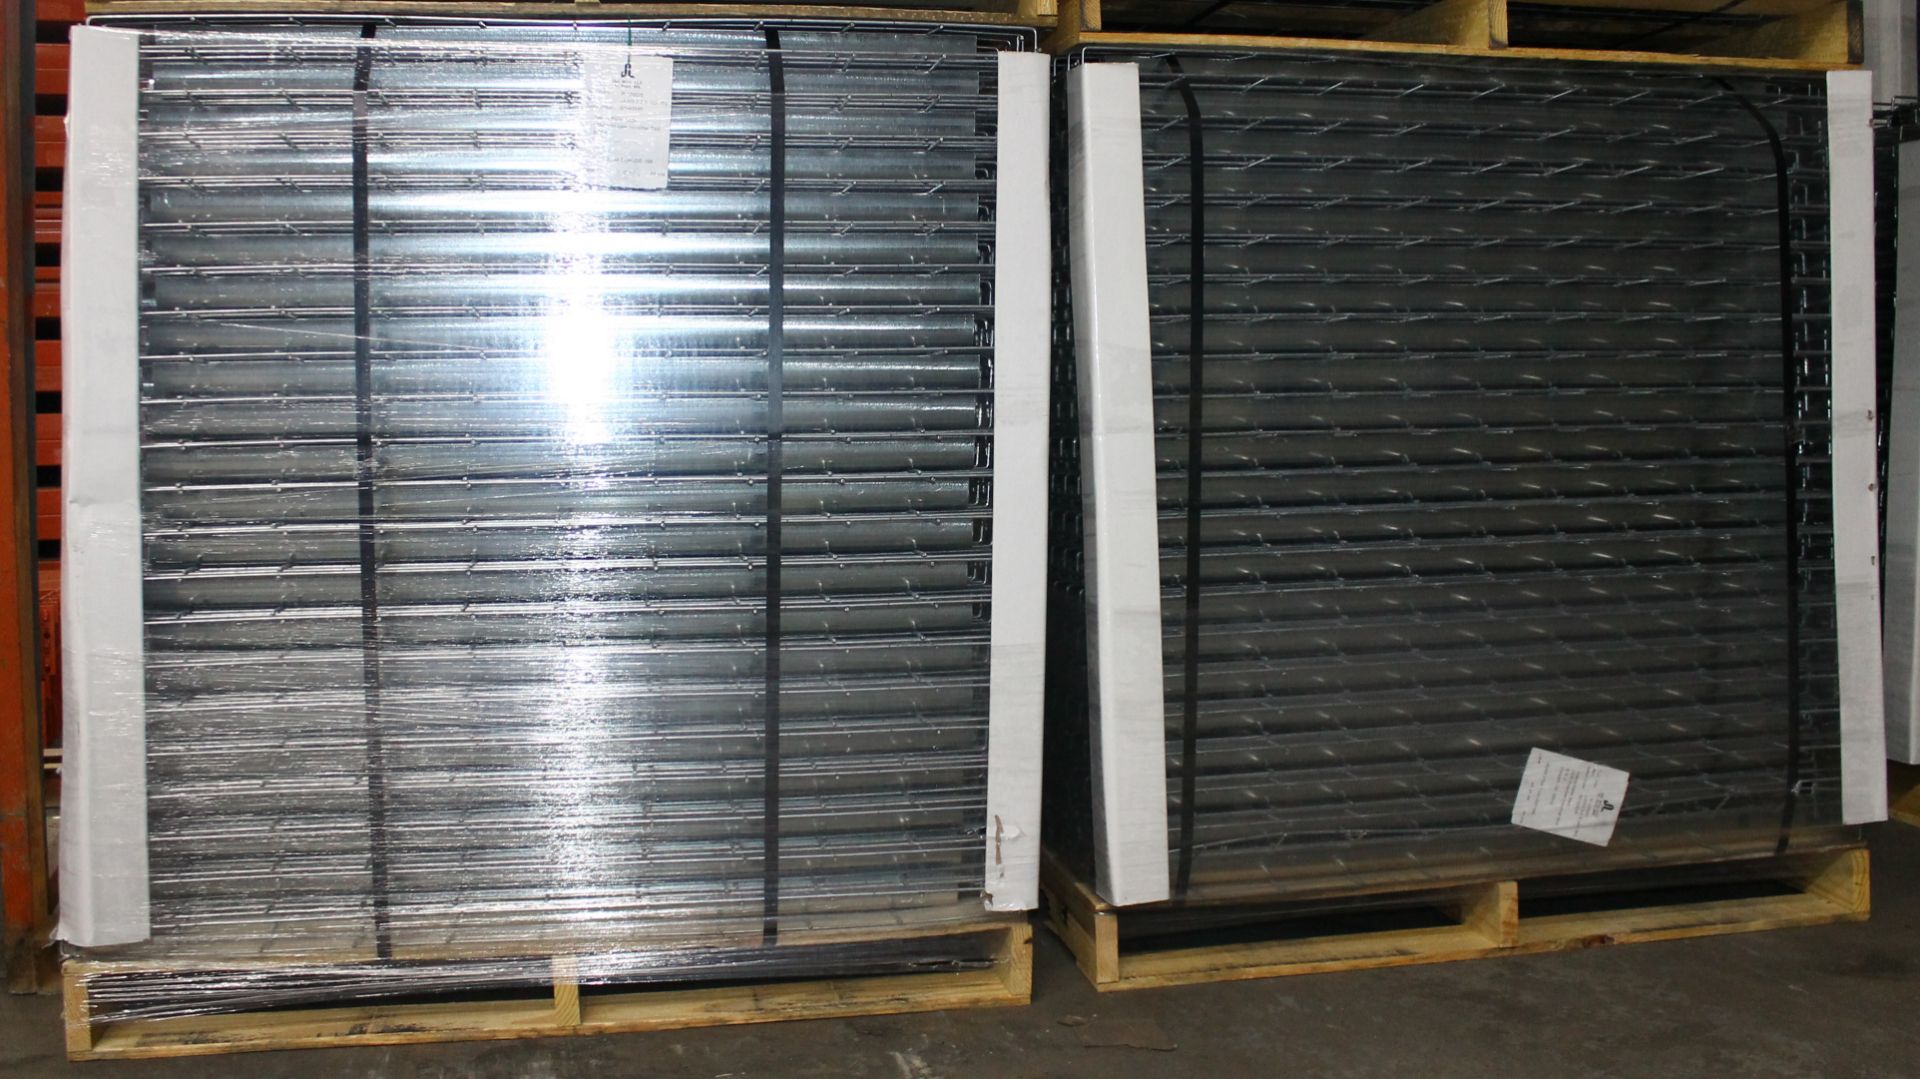 NEW 80 PCS OF STANDARD 42" X 53" WIREDECK - 2050 LBS CAPACITY - Image 2 of 2